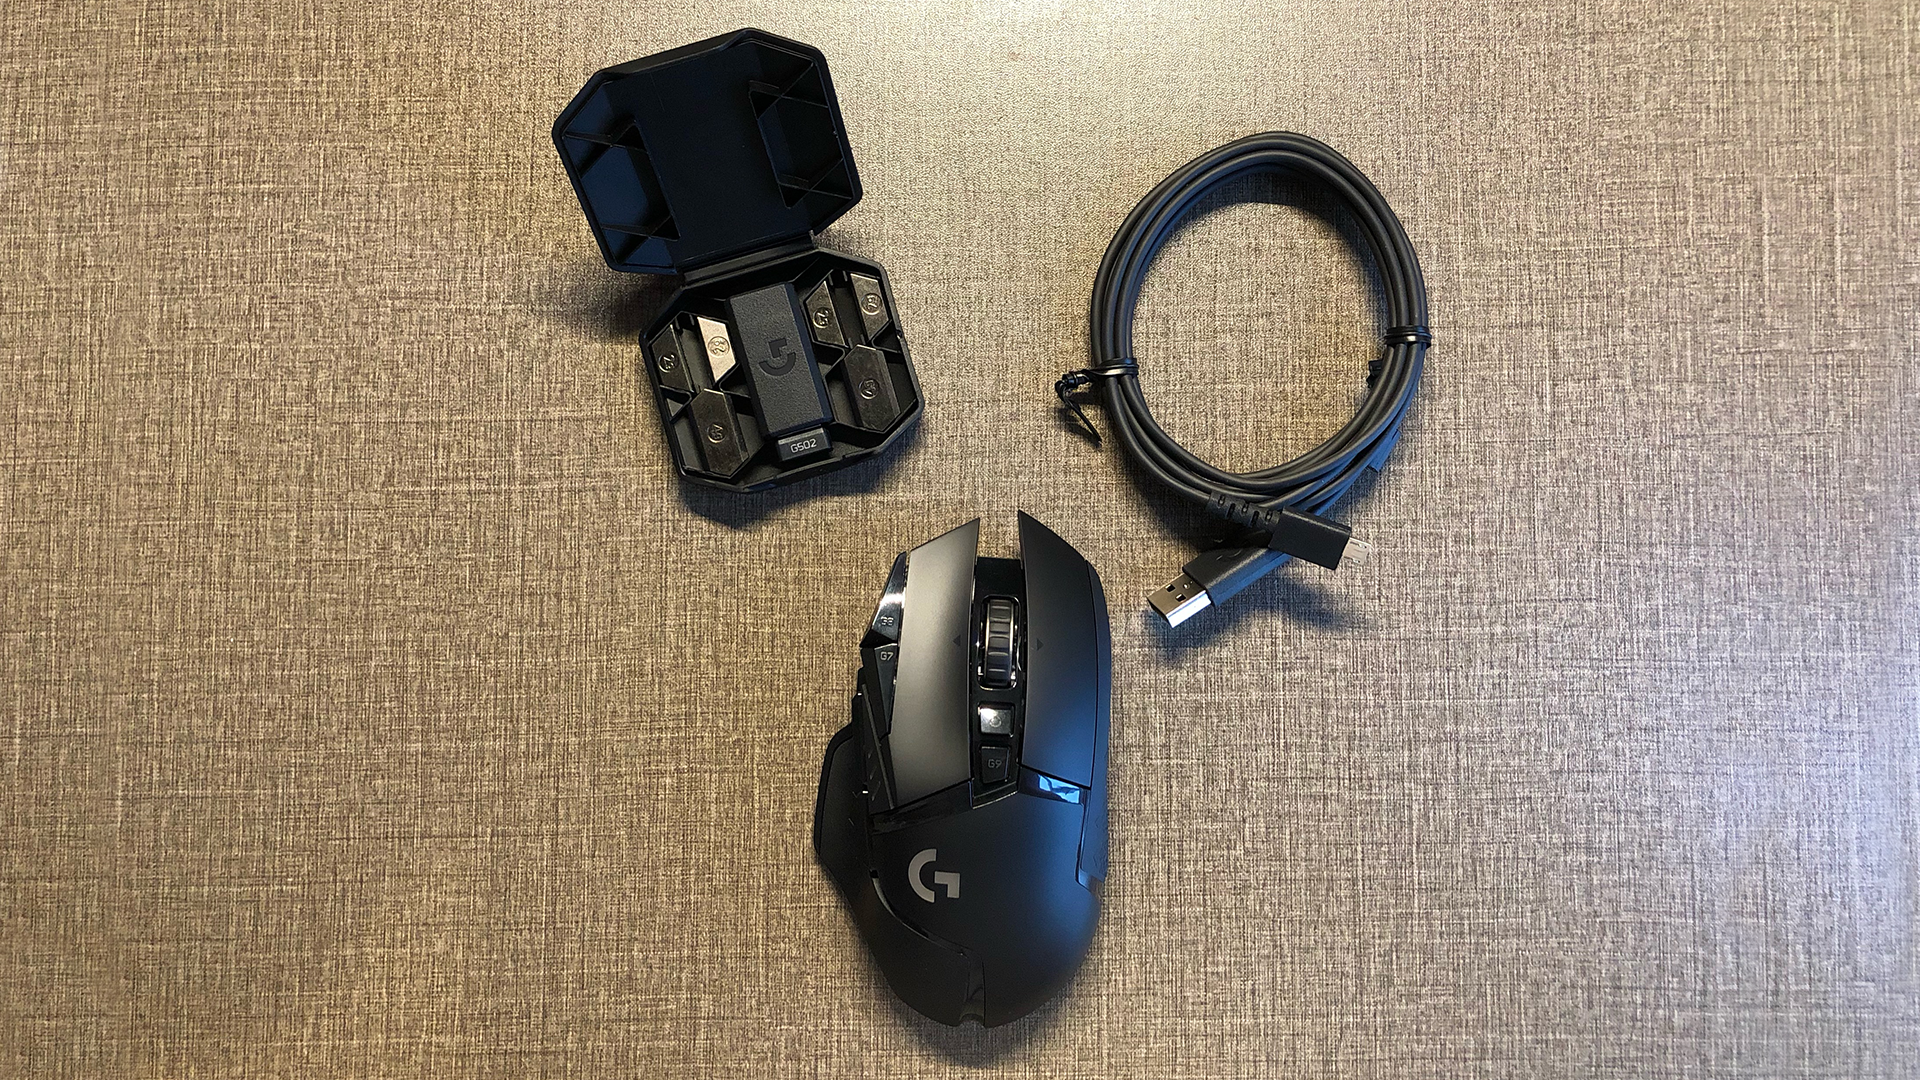 Top down view of the mouse and bits that came with it